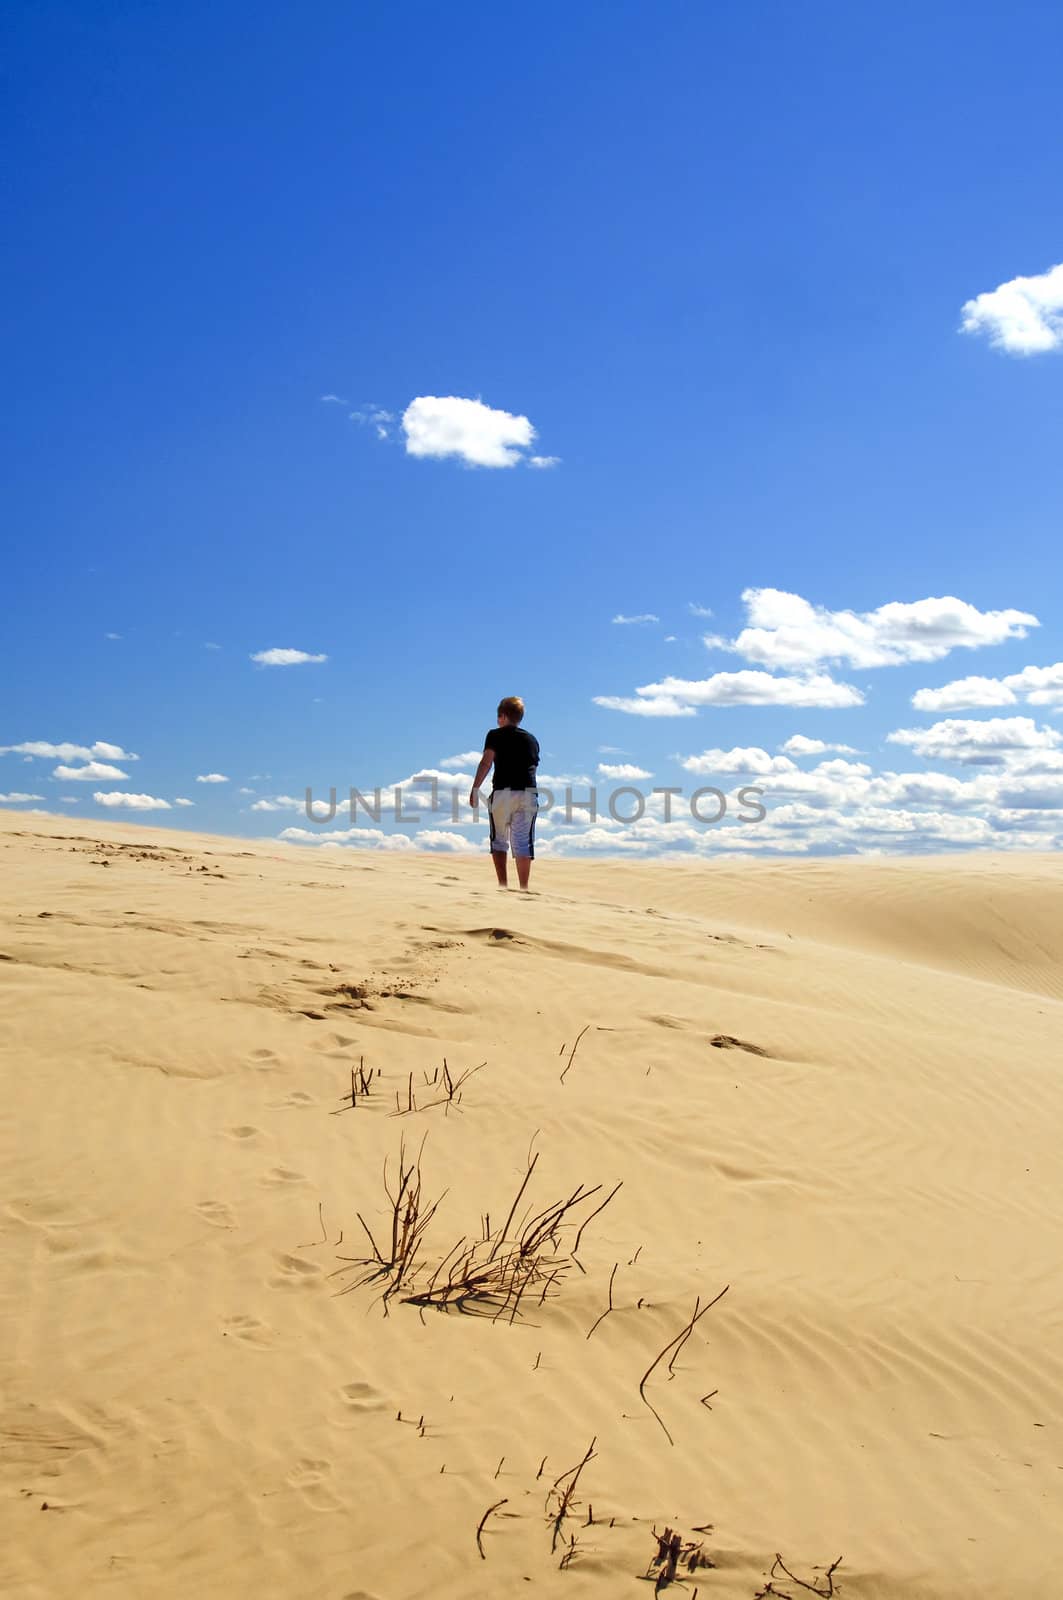 Walking in the sand by GryT